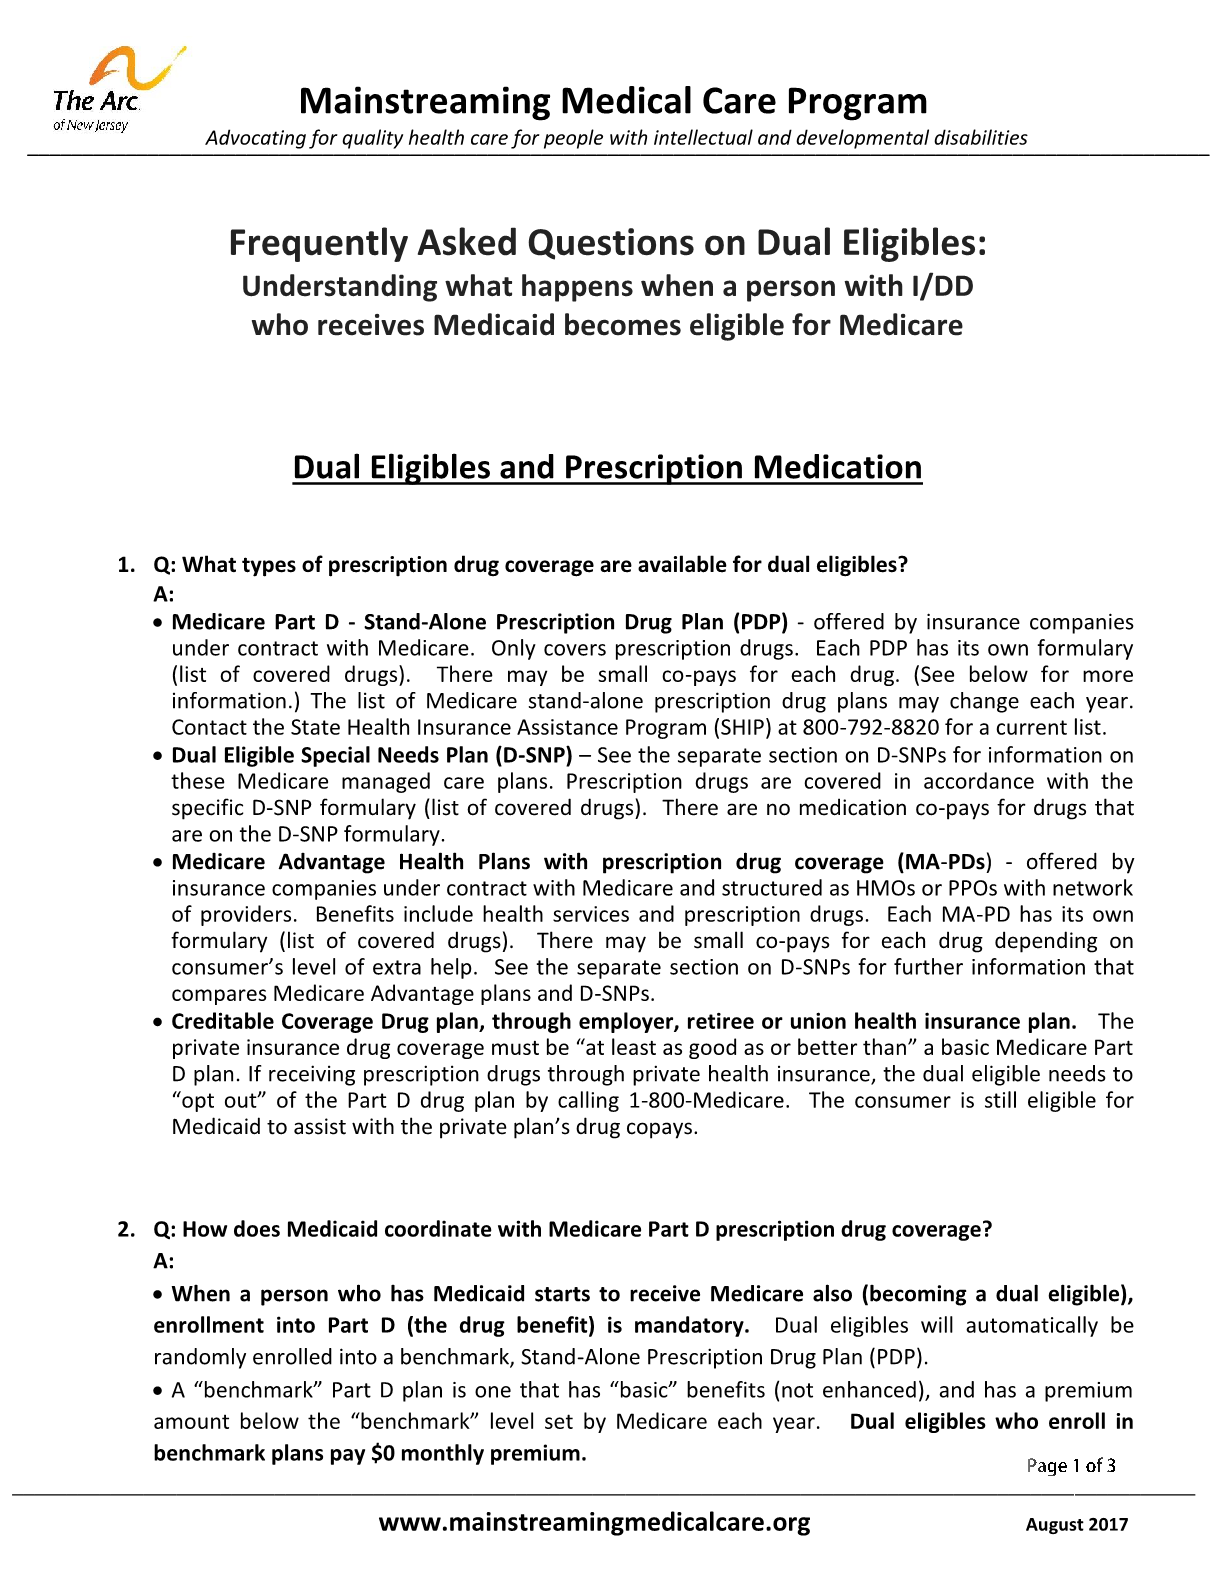 FAQ on Dual Eligibles: Understanding what happens when a person with IDD who receives Medicaid becomes eligible for Medicare - Dual Eligibles and Prescription Medication